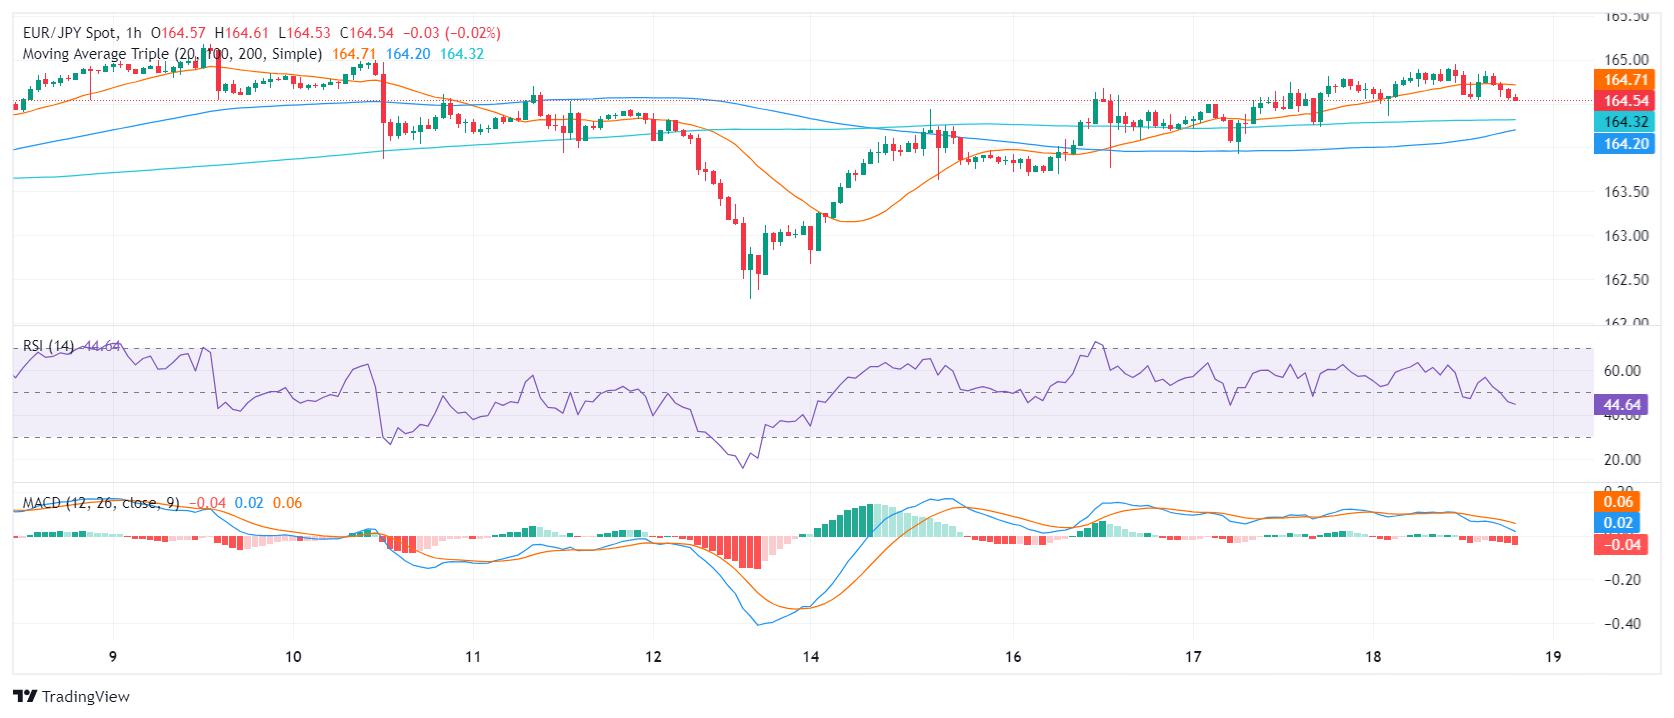 EUR/JPY Price Analysis: Bulls Maintain Control, consolidation phase likely